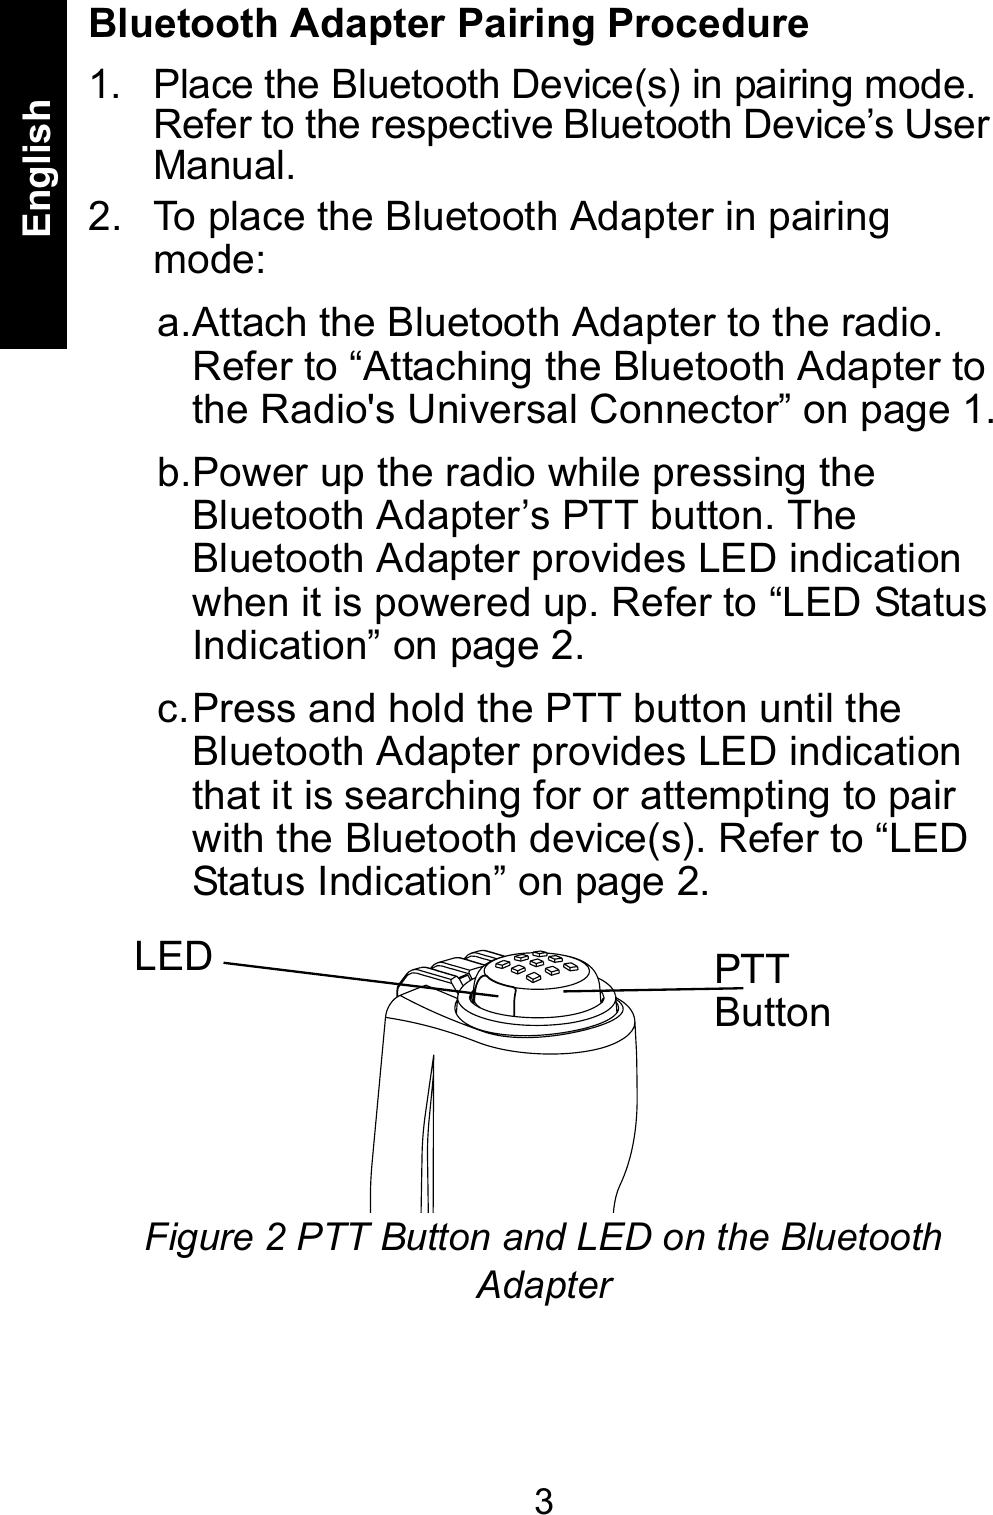 3EnglishBluetooth Adapter Pairing Procedure1. Place the Bluetooth Device(s) in pairing mode. Refer to the respective Bluetooth Device’s User Manual.2. To place the Bluetooth Adapter in pairing mode:a.Attach the Bluetooth Adapter to the radio. Refer to “Attaching the Bluetooth Adapter to the Radio&apos;s Universal Connector” on page 1.b.Power up the radio while pressing the Bluetooth Adapter’s PTT button. The Bluetooth Adapter provides LED indication when it is powered up. Refer to “LED Status Indication” on page 2.c.Press and hold the PTT button until the Bluetooth Adapter provides LED indication that it is searching for or attempting to pair with the Bluetooth device(s). Refer to “LED Status Indication” on page 2.Figure 2 PTT Button and LED on the Bluetooth AdapterPTT ButtonLED